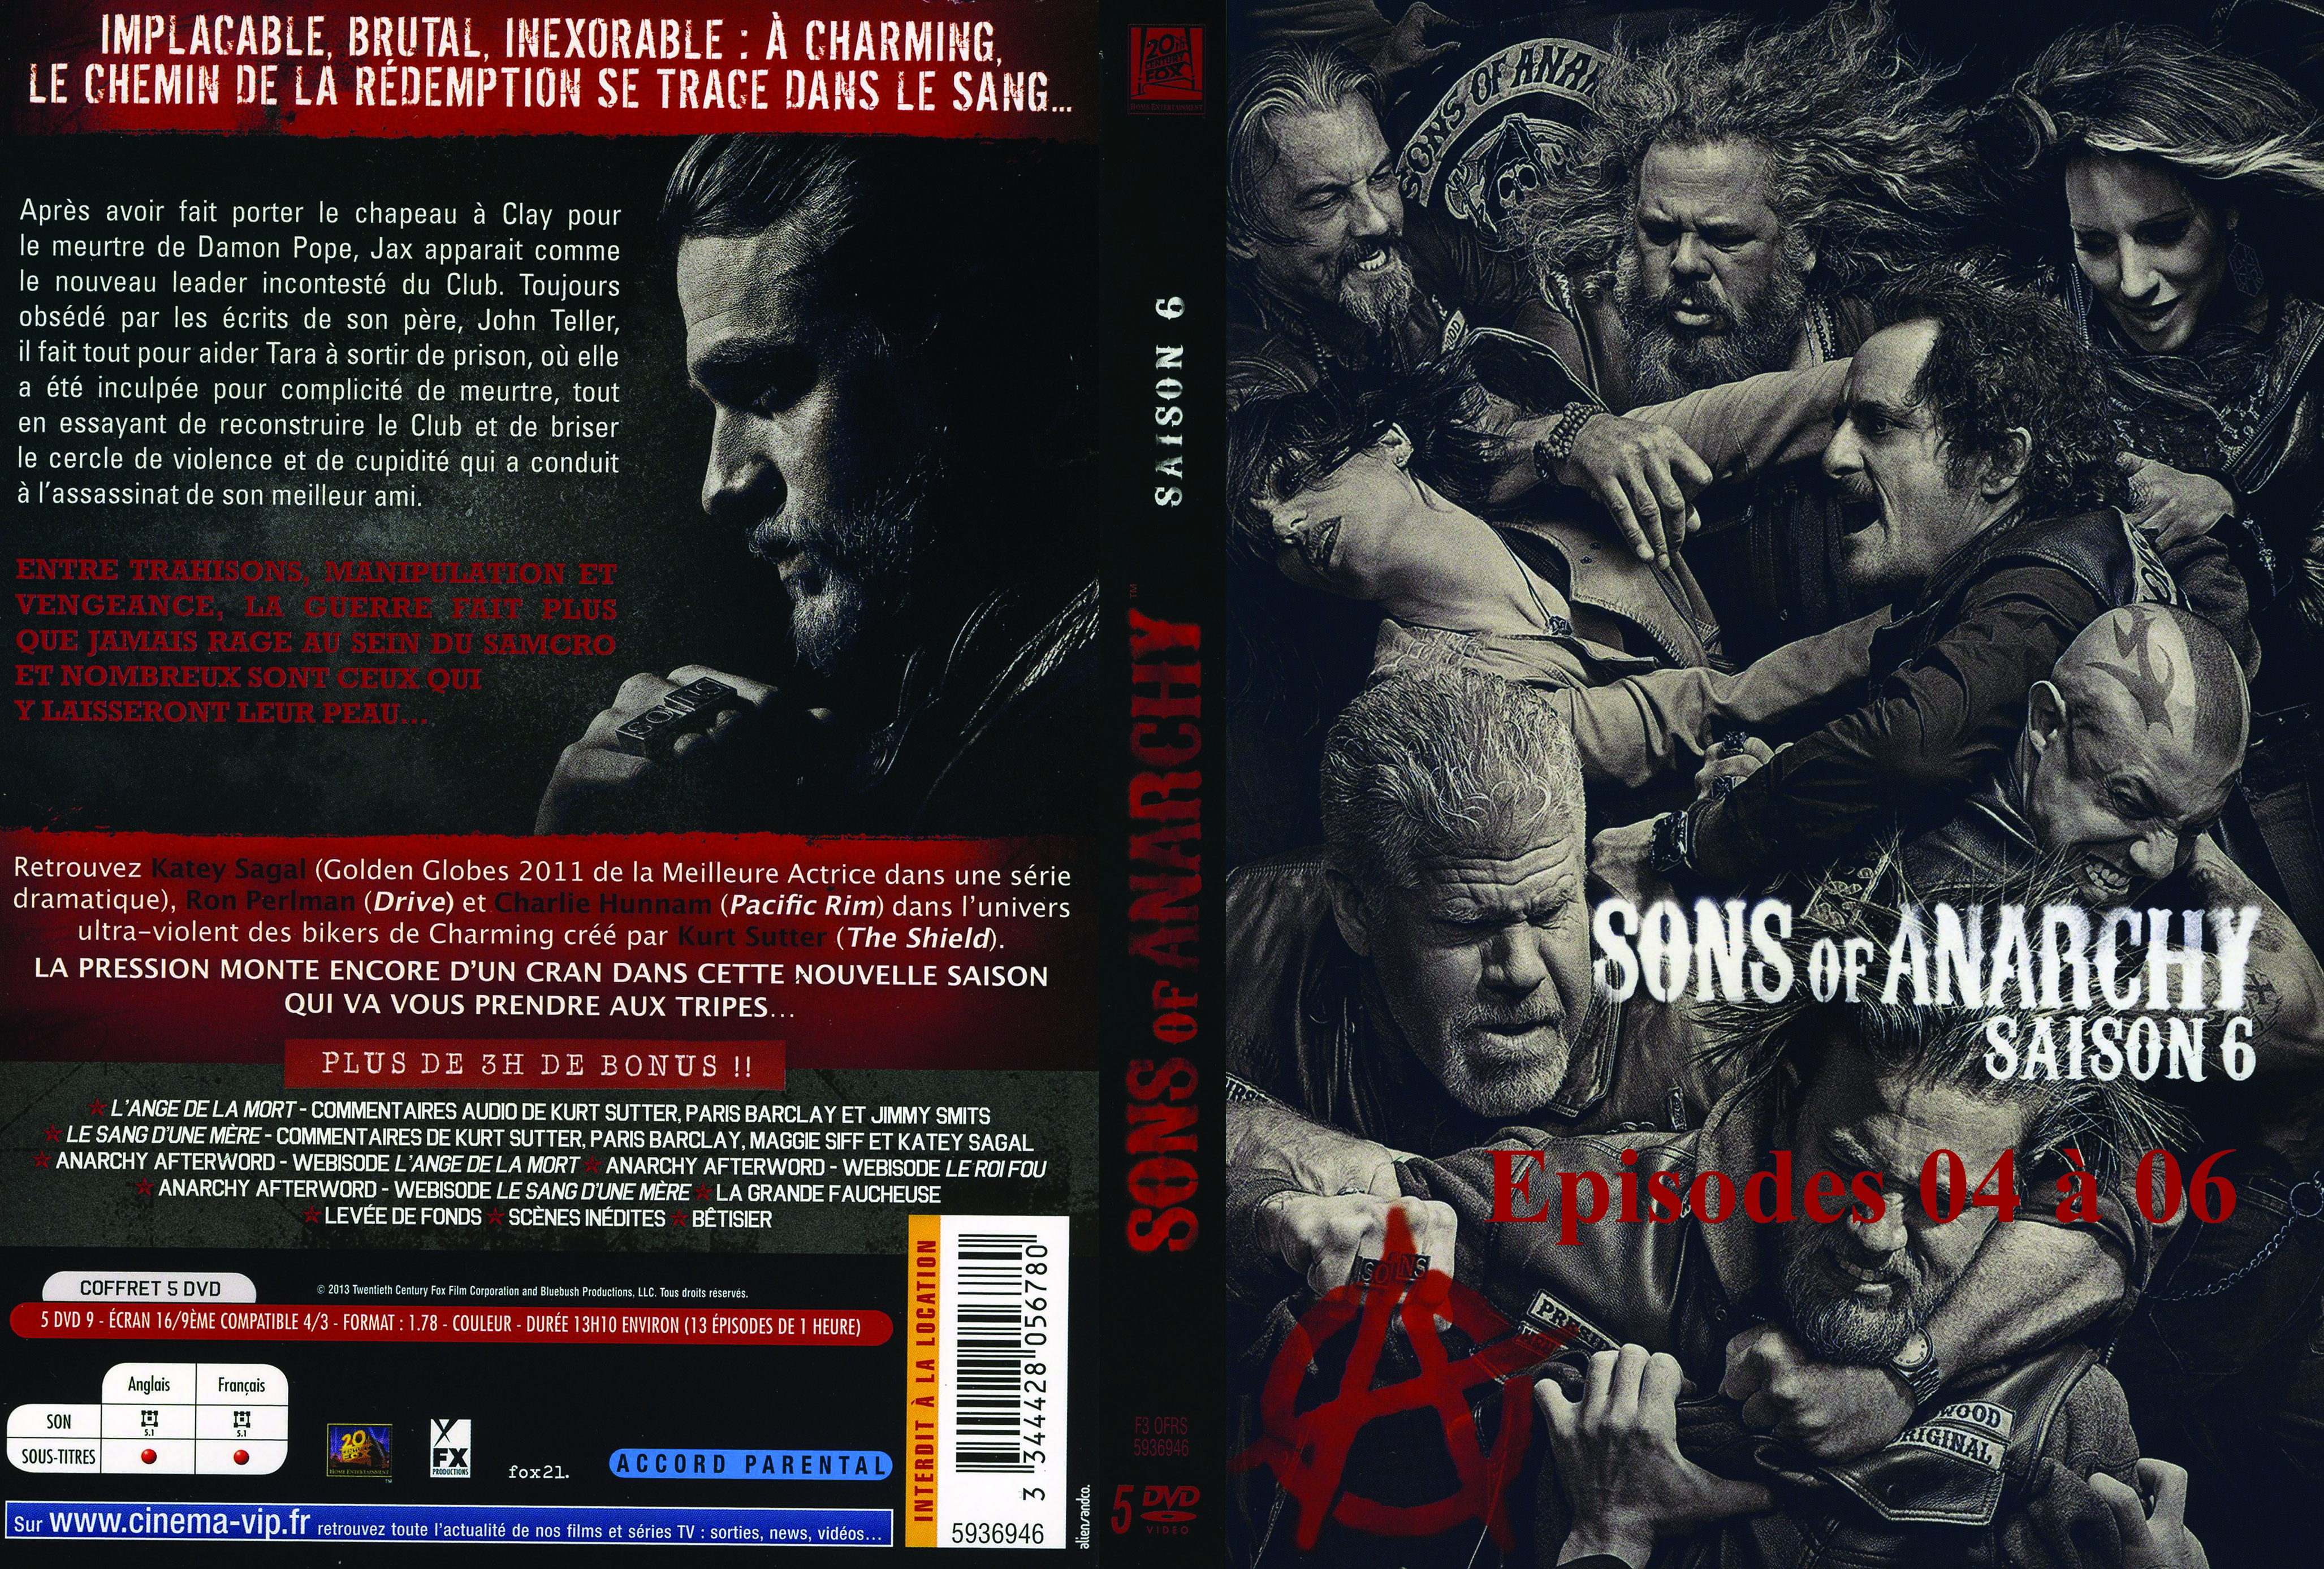 Jaquette DVD Sons of anarchy saison 6 DVD 2 custom